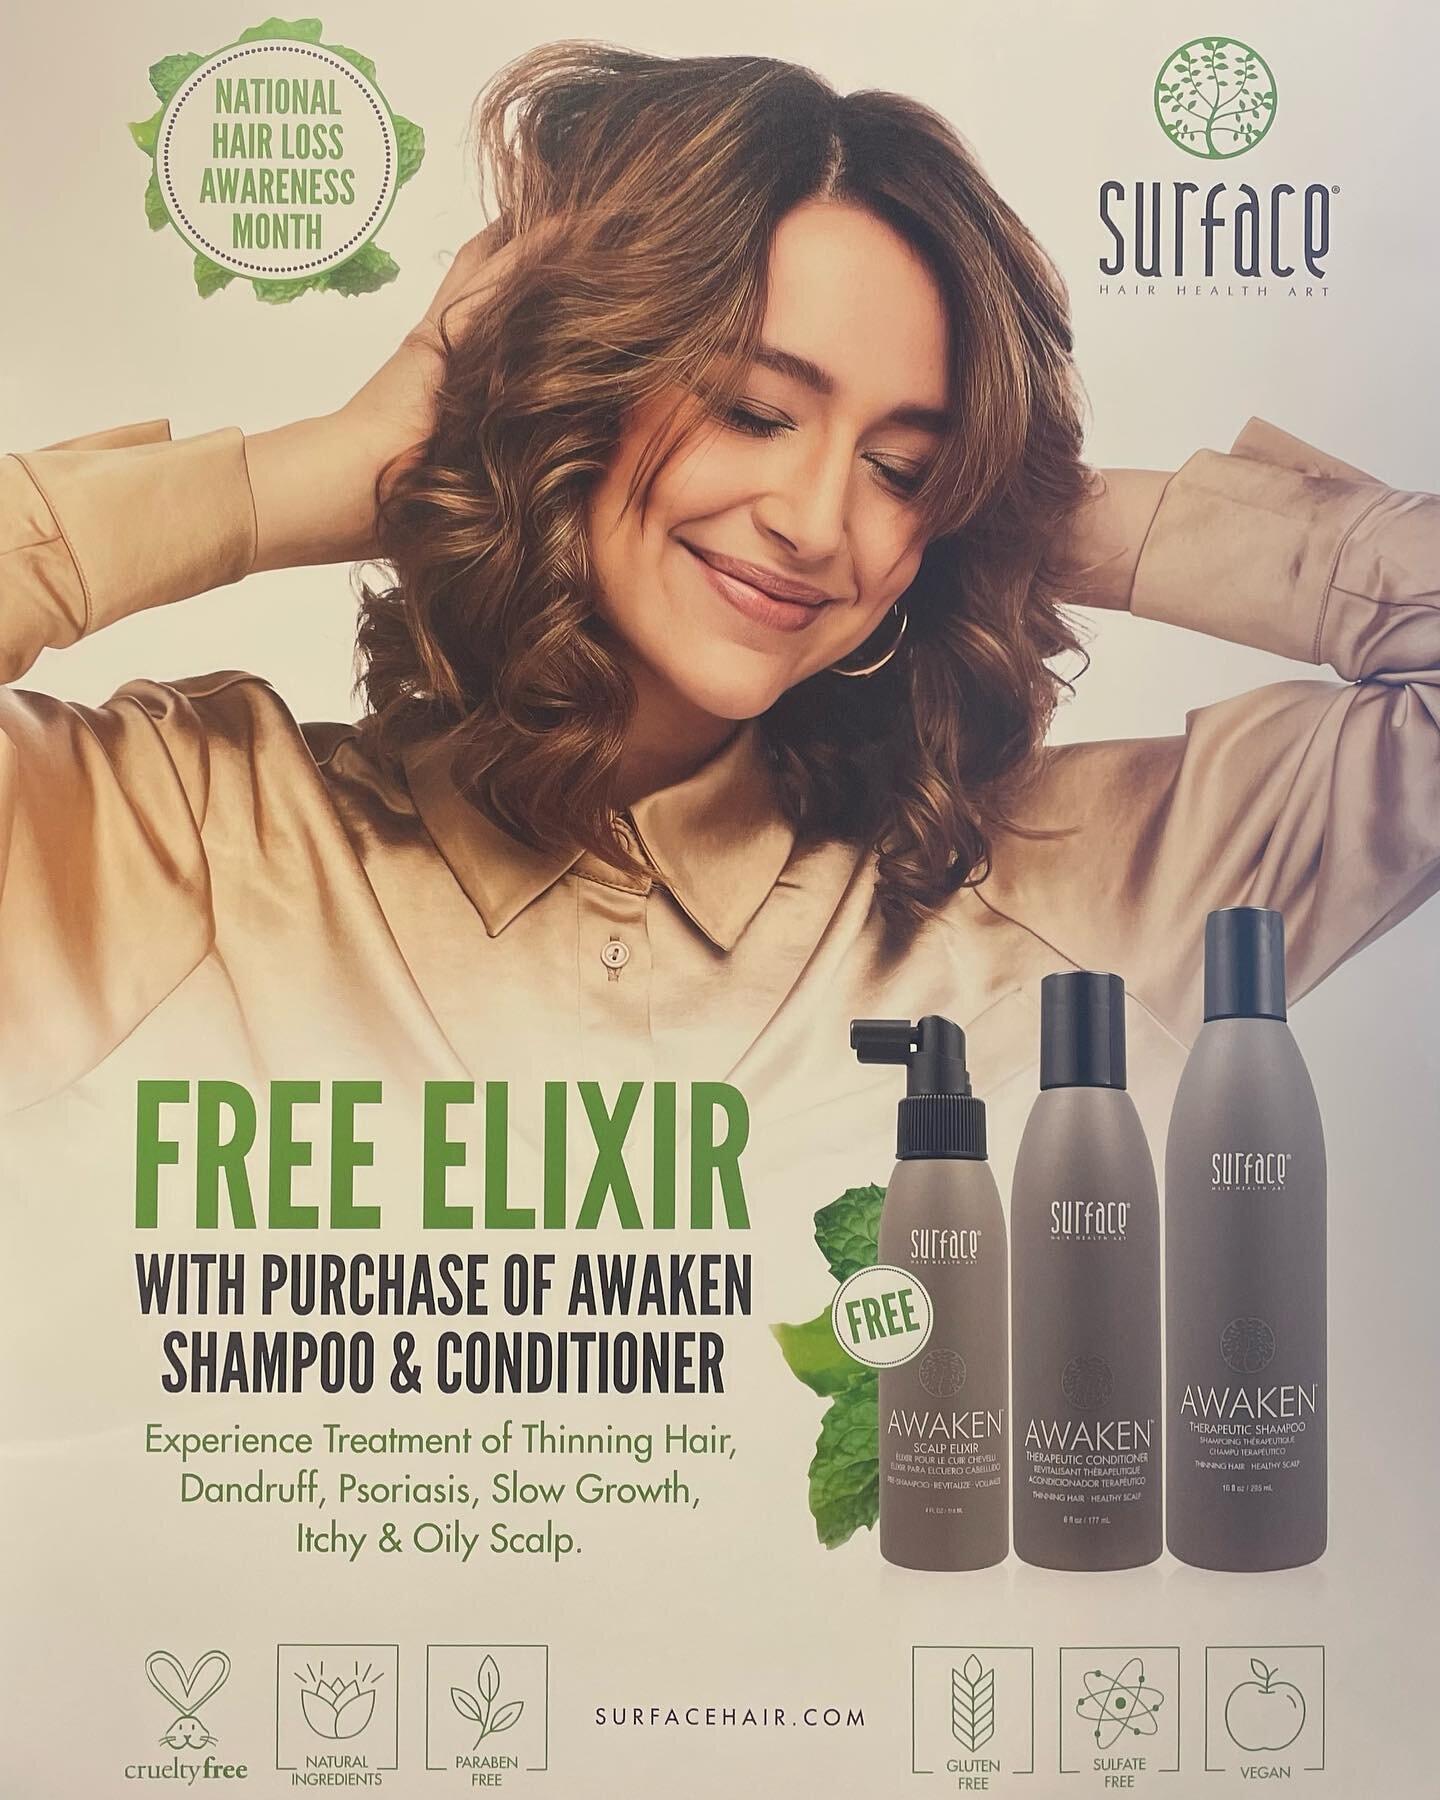 New @surfacehairhealth promotion going on for National Hair Loss Awareness Month! Buy the Surface Awaken shampoo and conditioner and receive a FREE elixir! For more information on the Awaken hair care line, feel free to drop into the salon and talk t